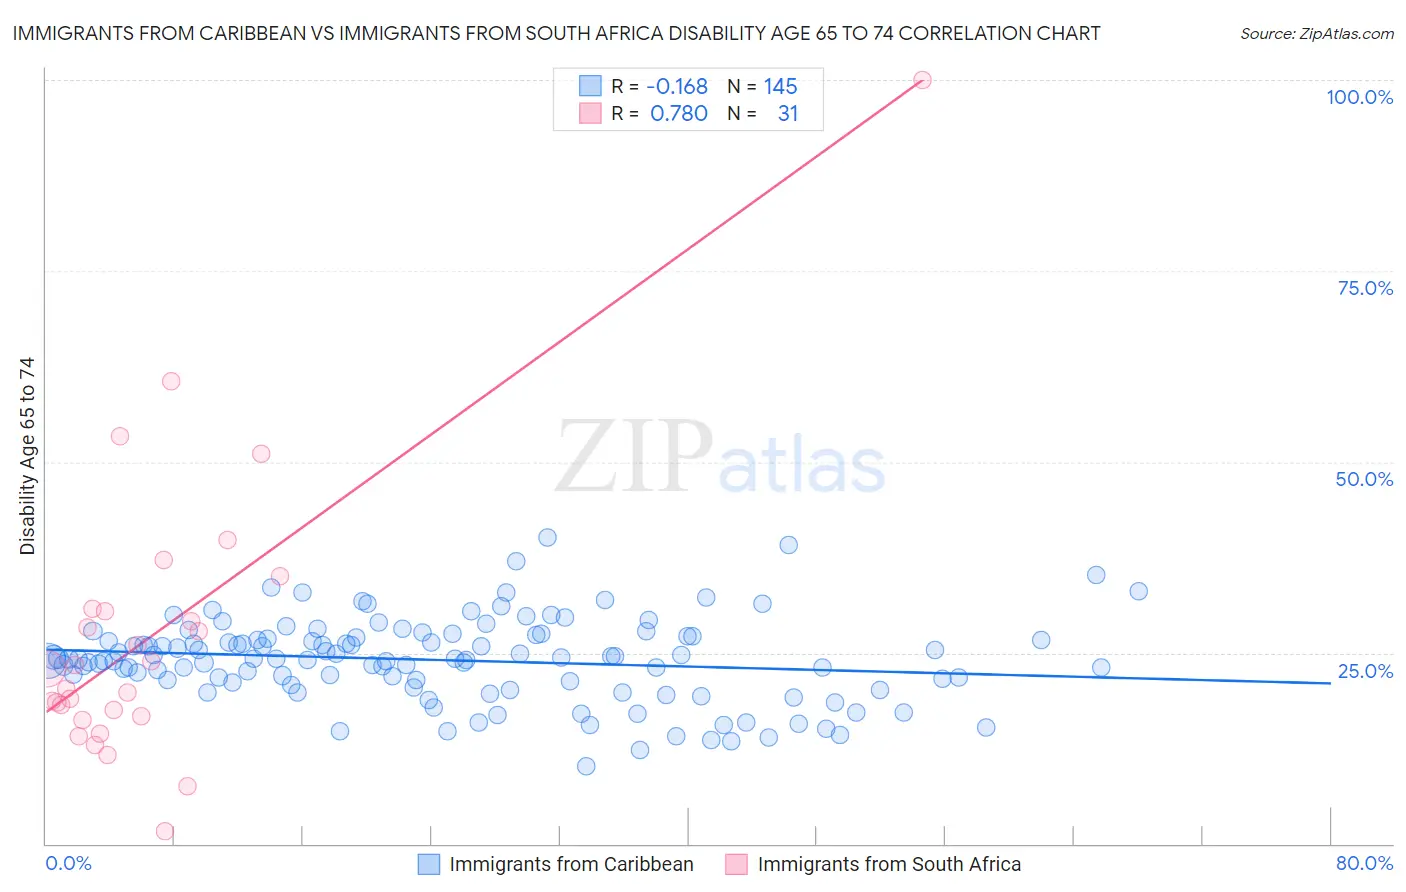 Immigrants from Caribbean vs Immigrants from South Africa Disability Age 65 to 74